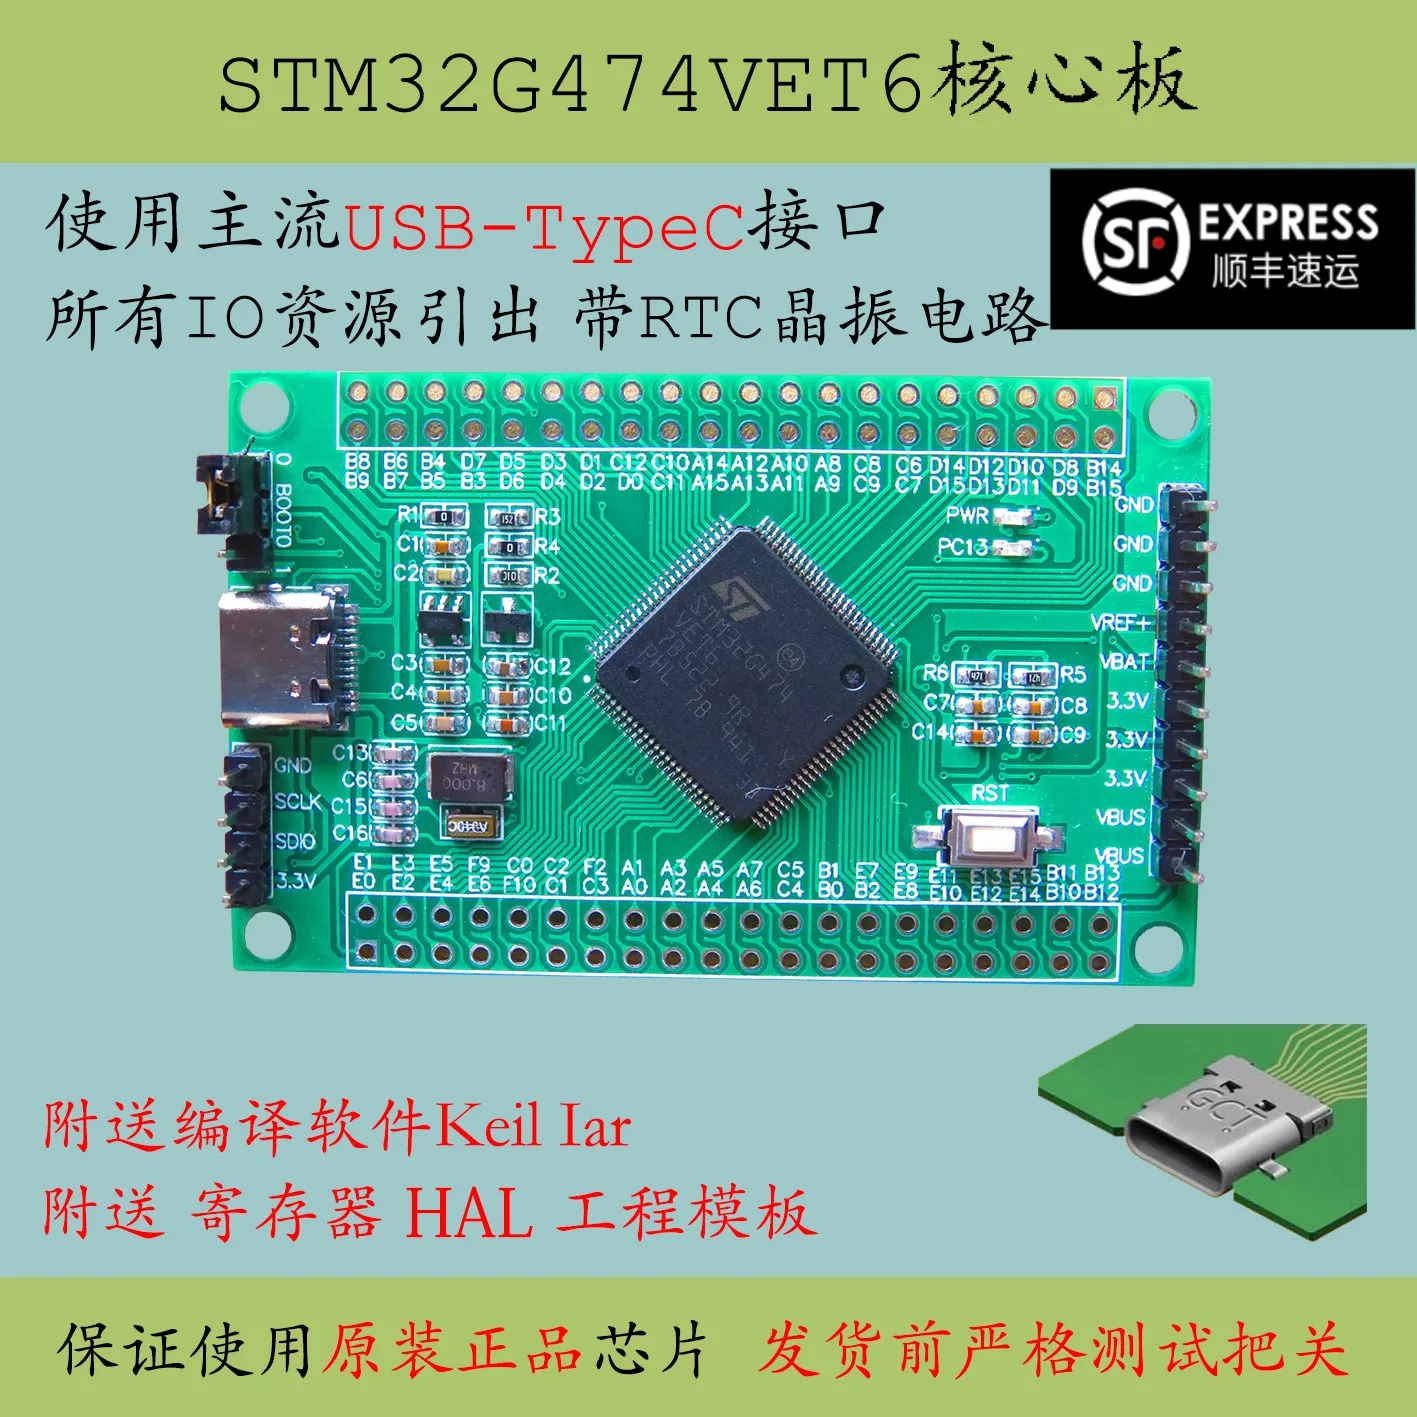 

G4 STM32G474VET6 microcomputer system core board new product development the large capacity 100 assessment board TYPEC